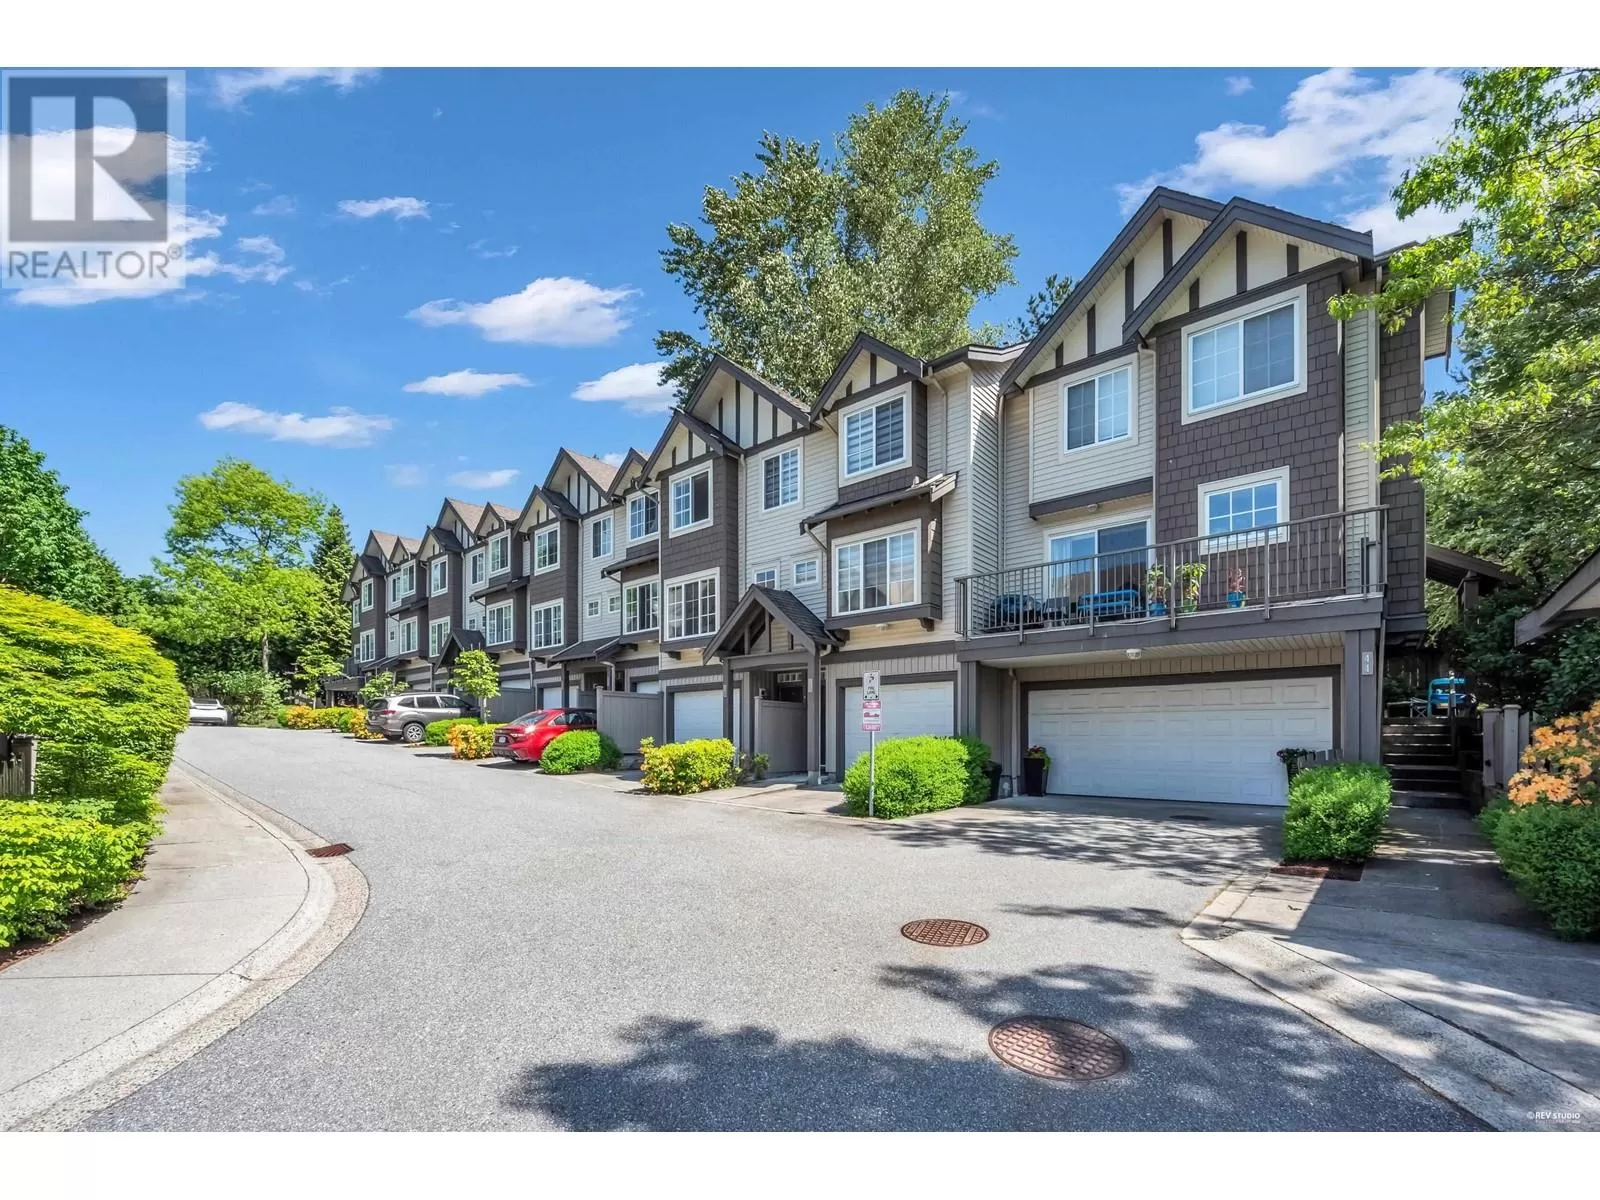 Row / Townhouse for rent: 46 3368 Morrey Court, Burnaby, British Columbia V3J 7Y5